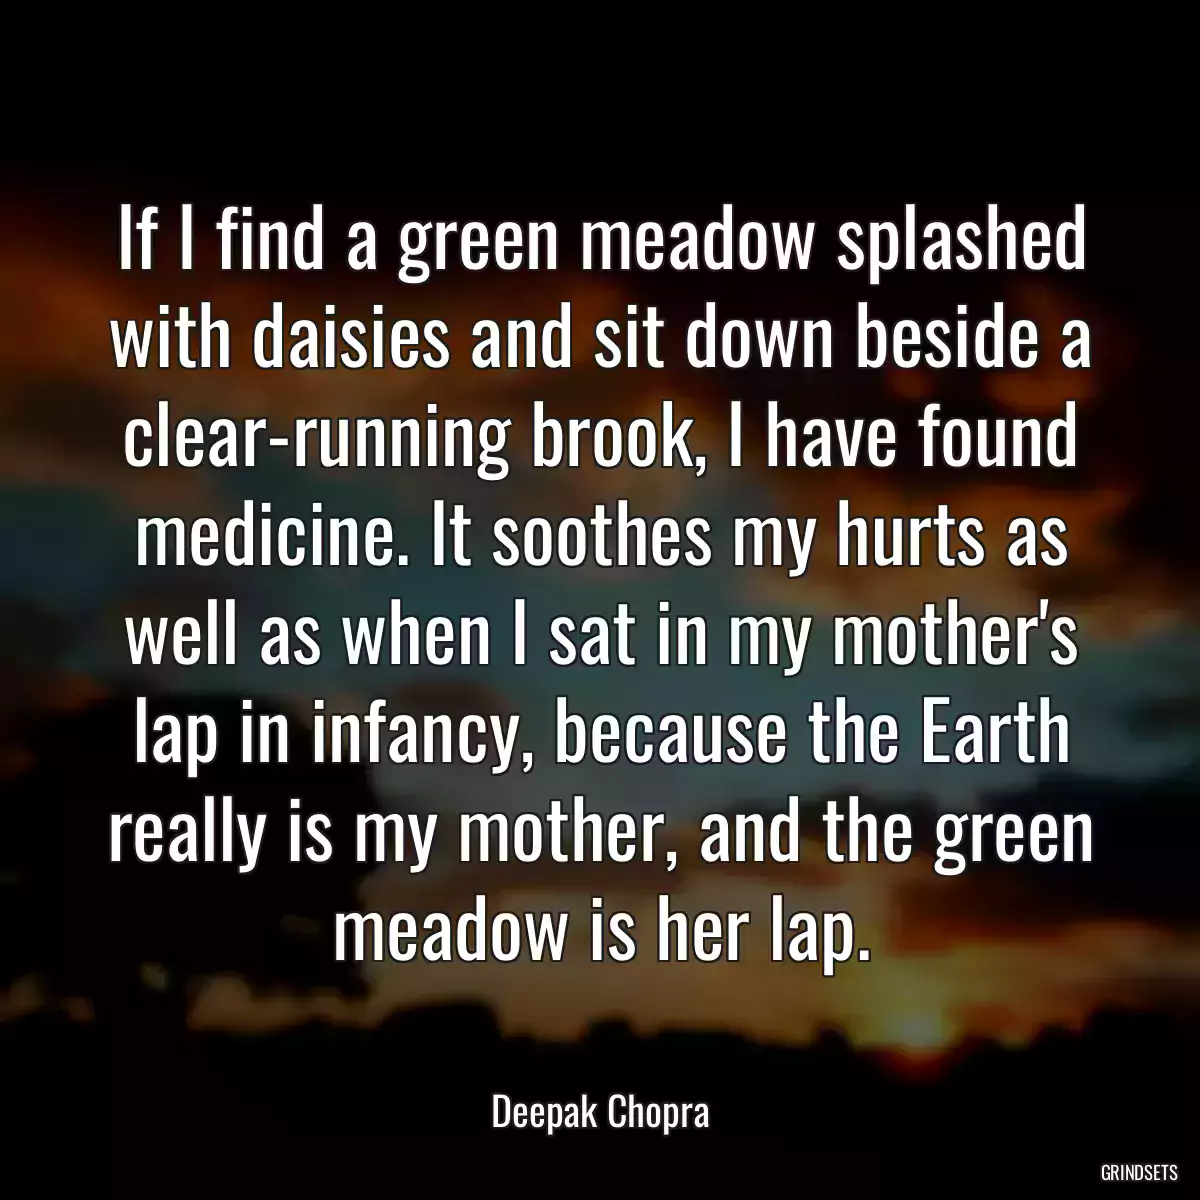 If I find a green meadow splashed with daisies and sit down beside a clear-running brook, I have found medicine. It soothes my hurts as well as when I sat in my mother\'s lap in infancy, because the Earth really is my mother, and the green meadow is her lap.